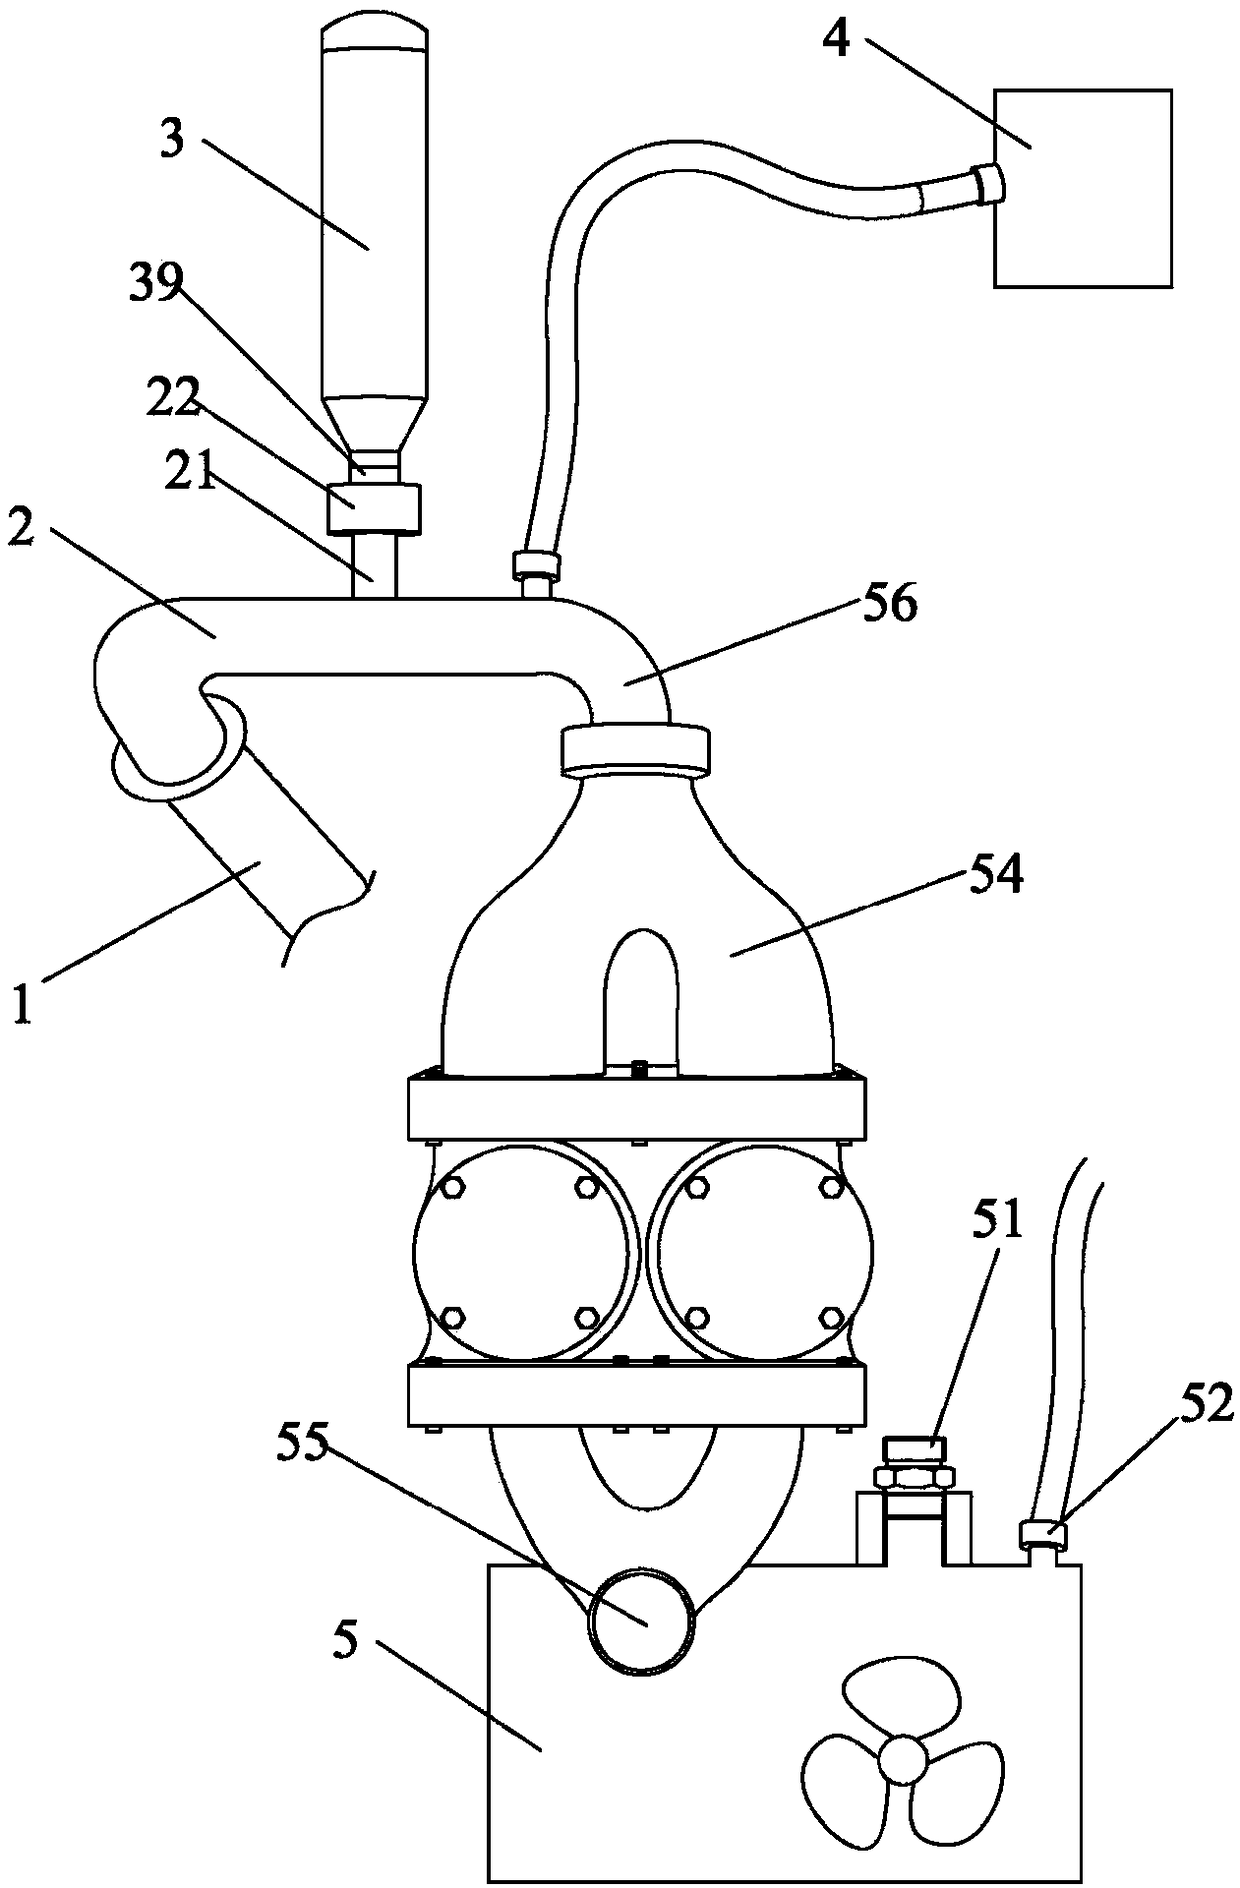 Foamed concrete foam mixing device provided with blades